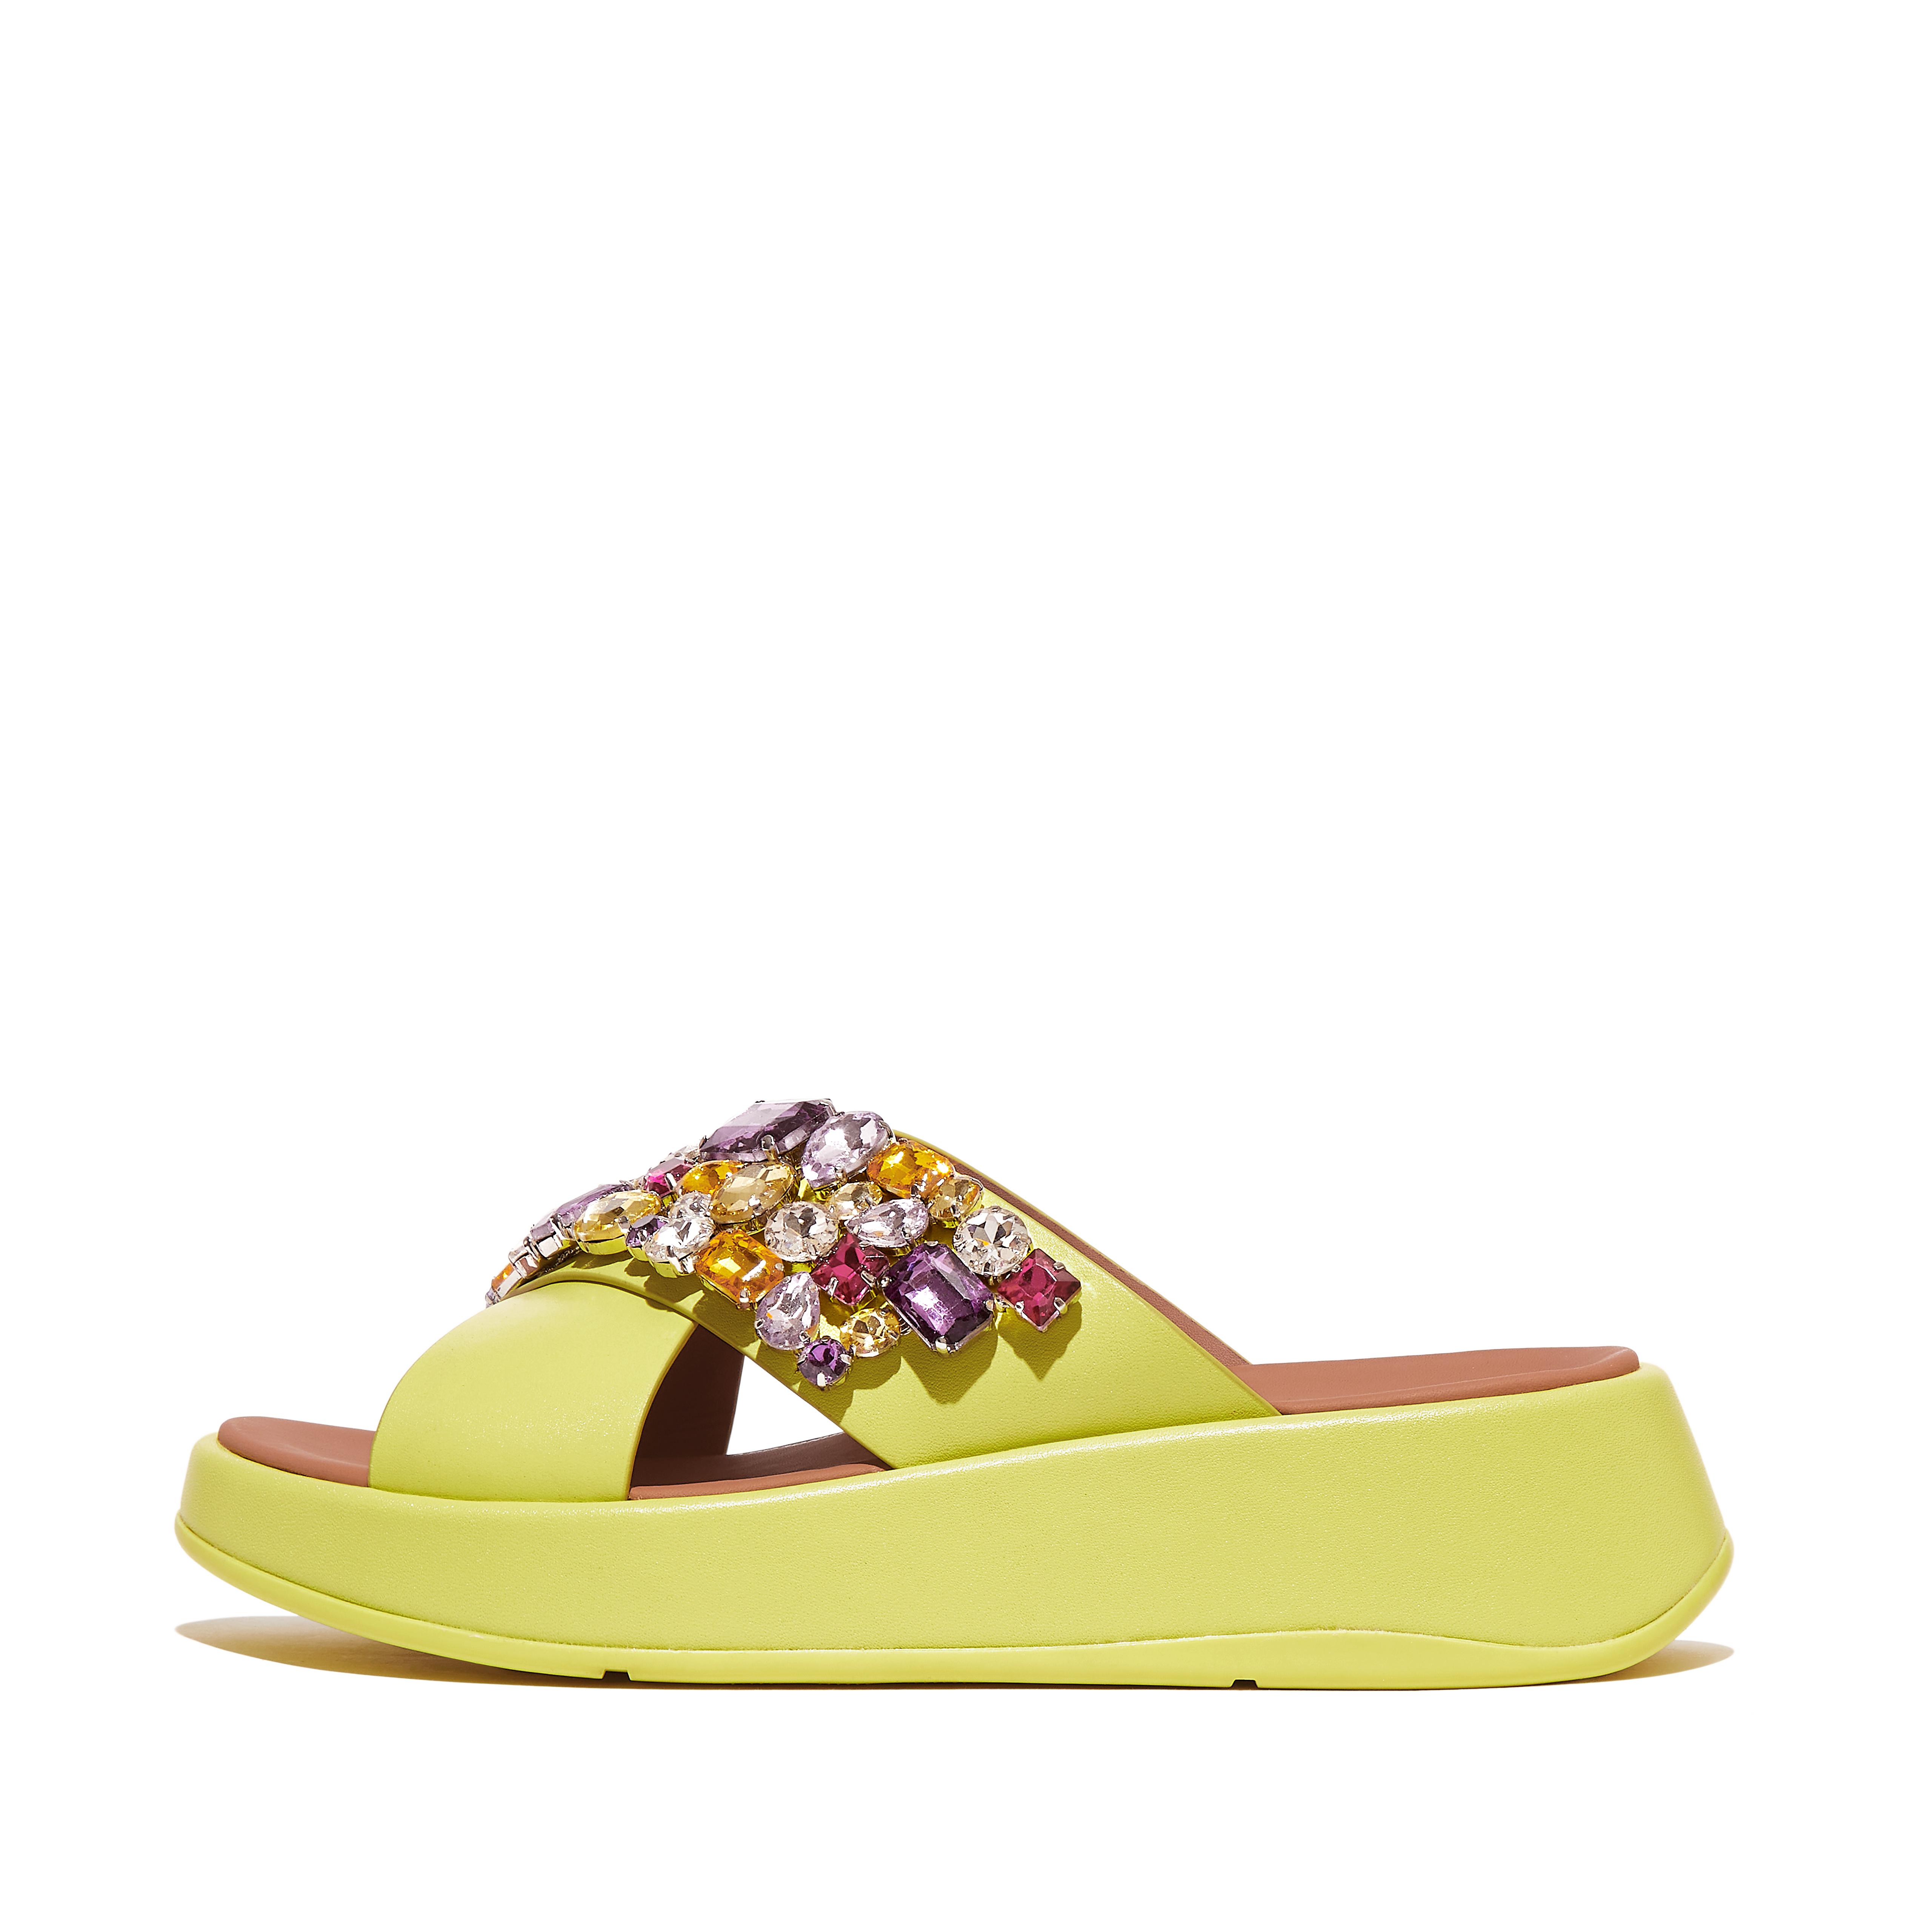 Fitflop Jewel-Deluxe Leather Flatform Cross Slides,Sunny Lime